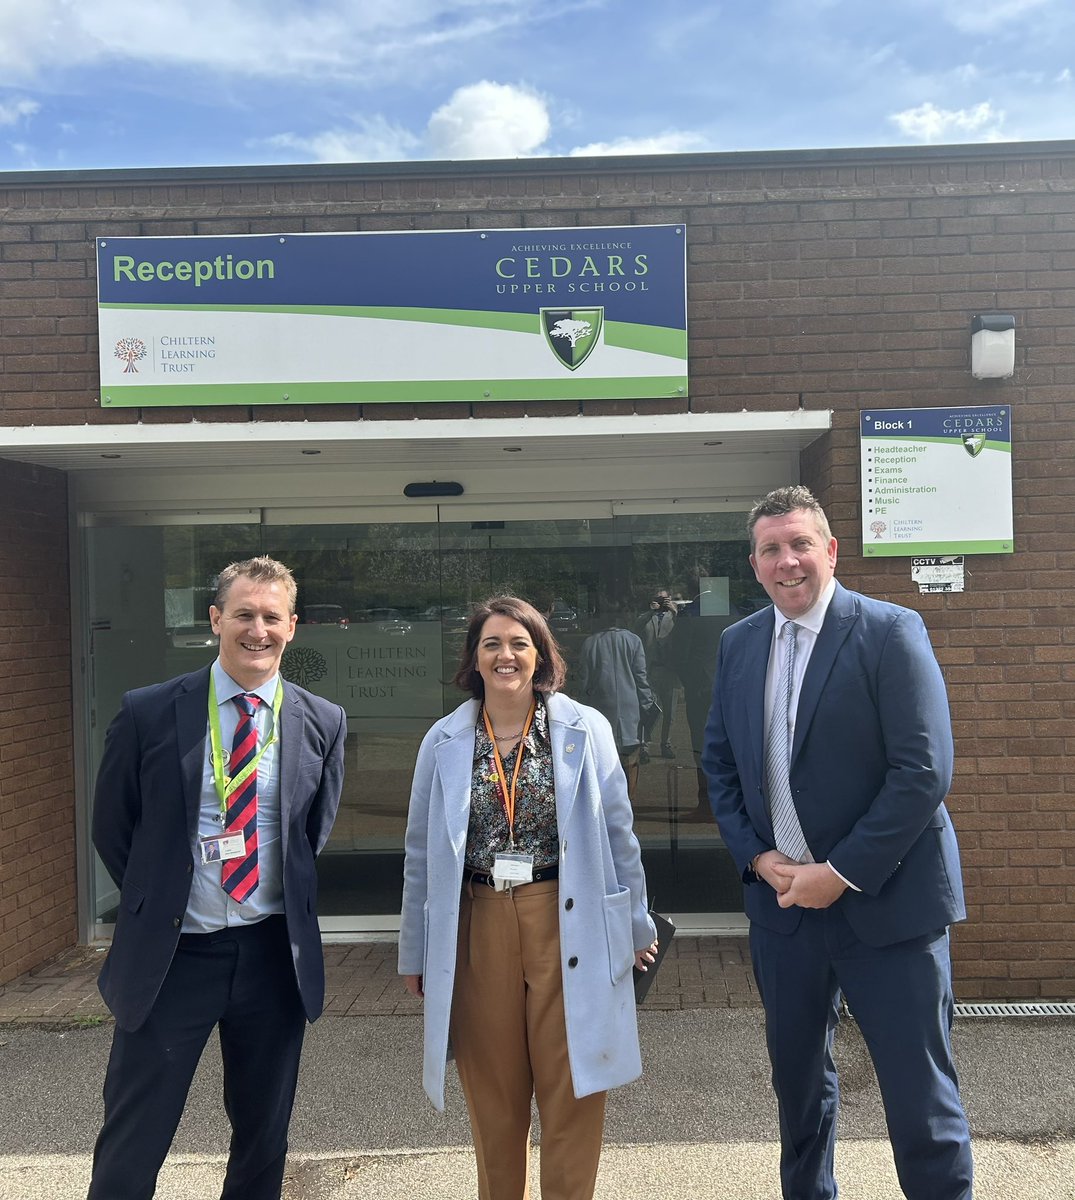 Adrian & Lorraine had a lovely visit for different reasons to @Cedars_Upper this morning. Lovely to bump into @MrsPHT & be able to listen to the huge improvements @QueensburyAcad . Local collaboration 👍. @mjpGibbs @F_MLeah @PMStock11 @LorraineHughe20